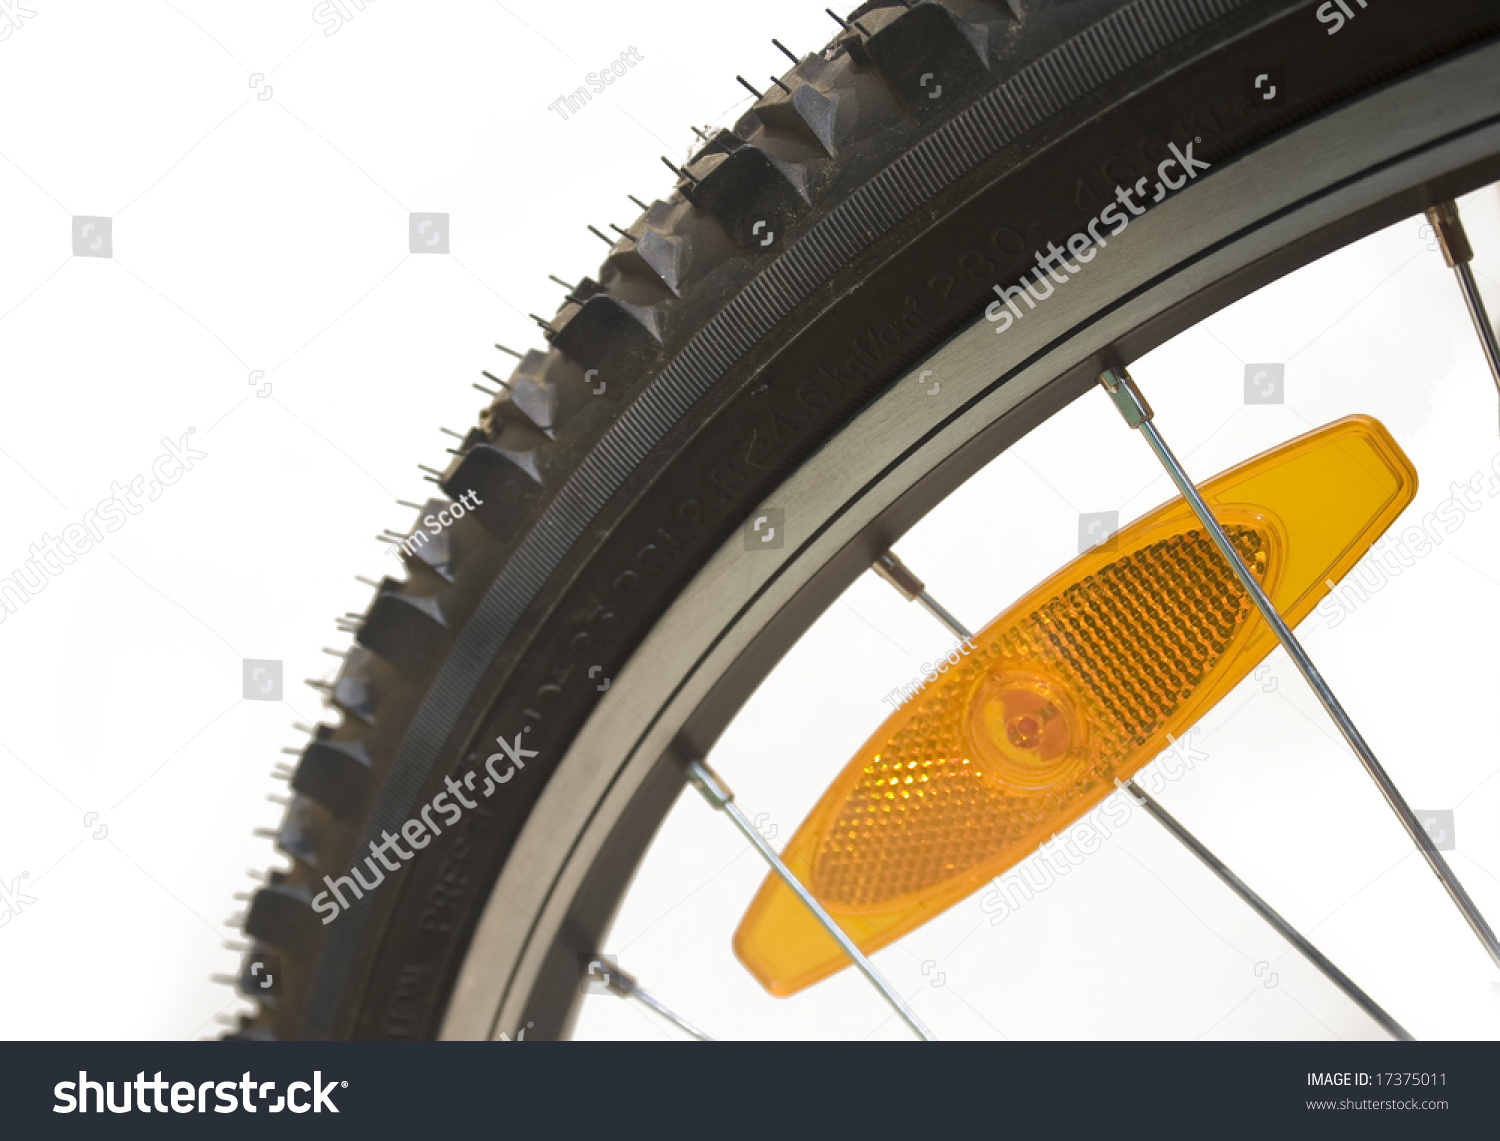 bicycle tyre reflector